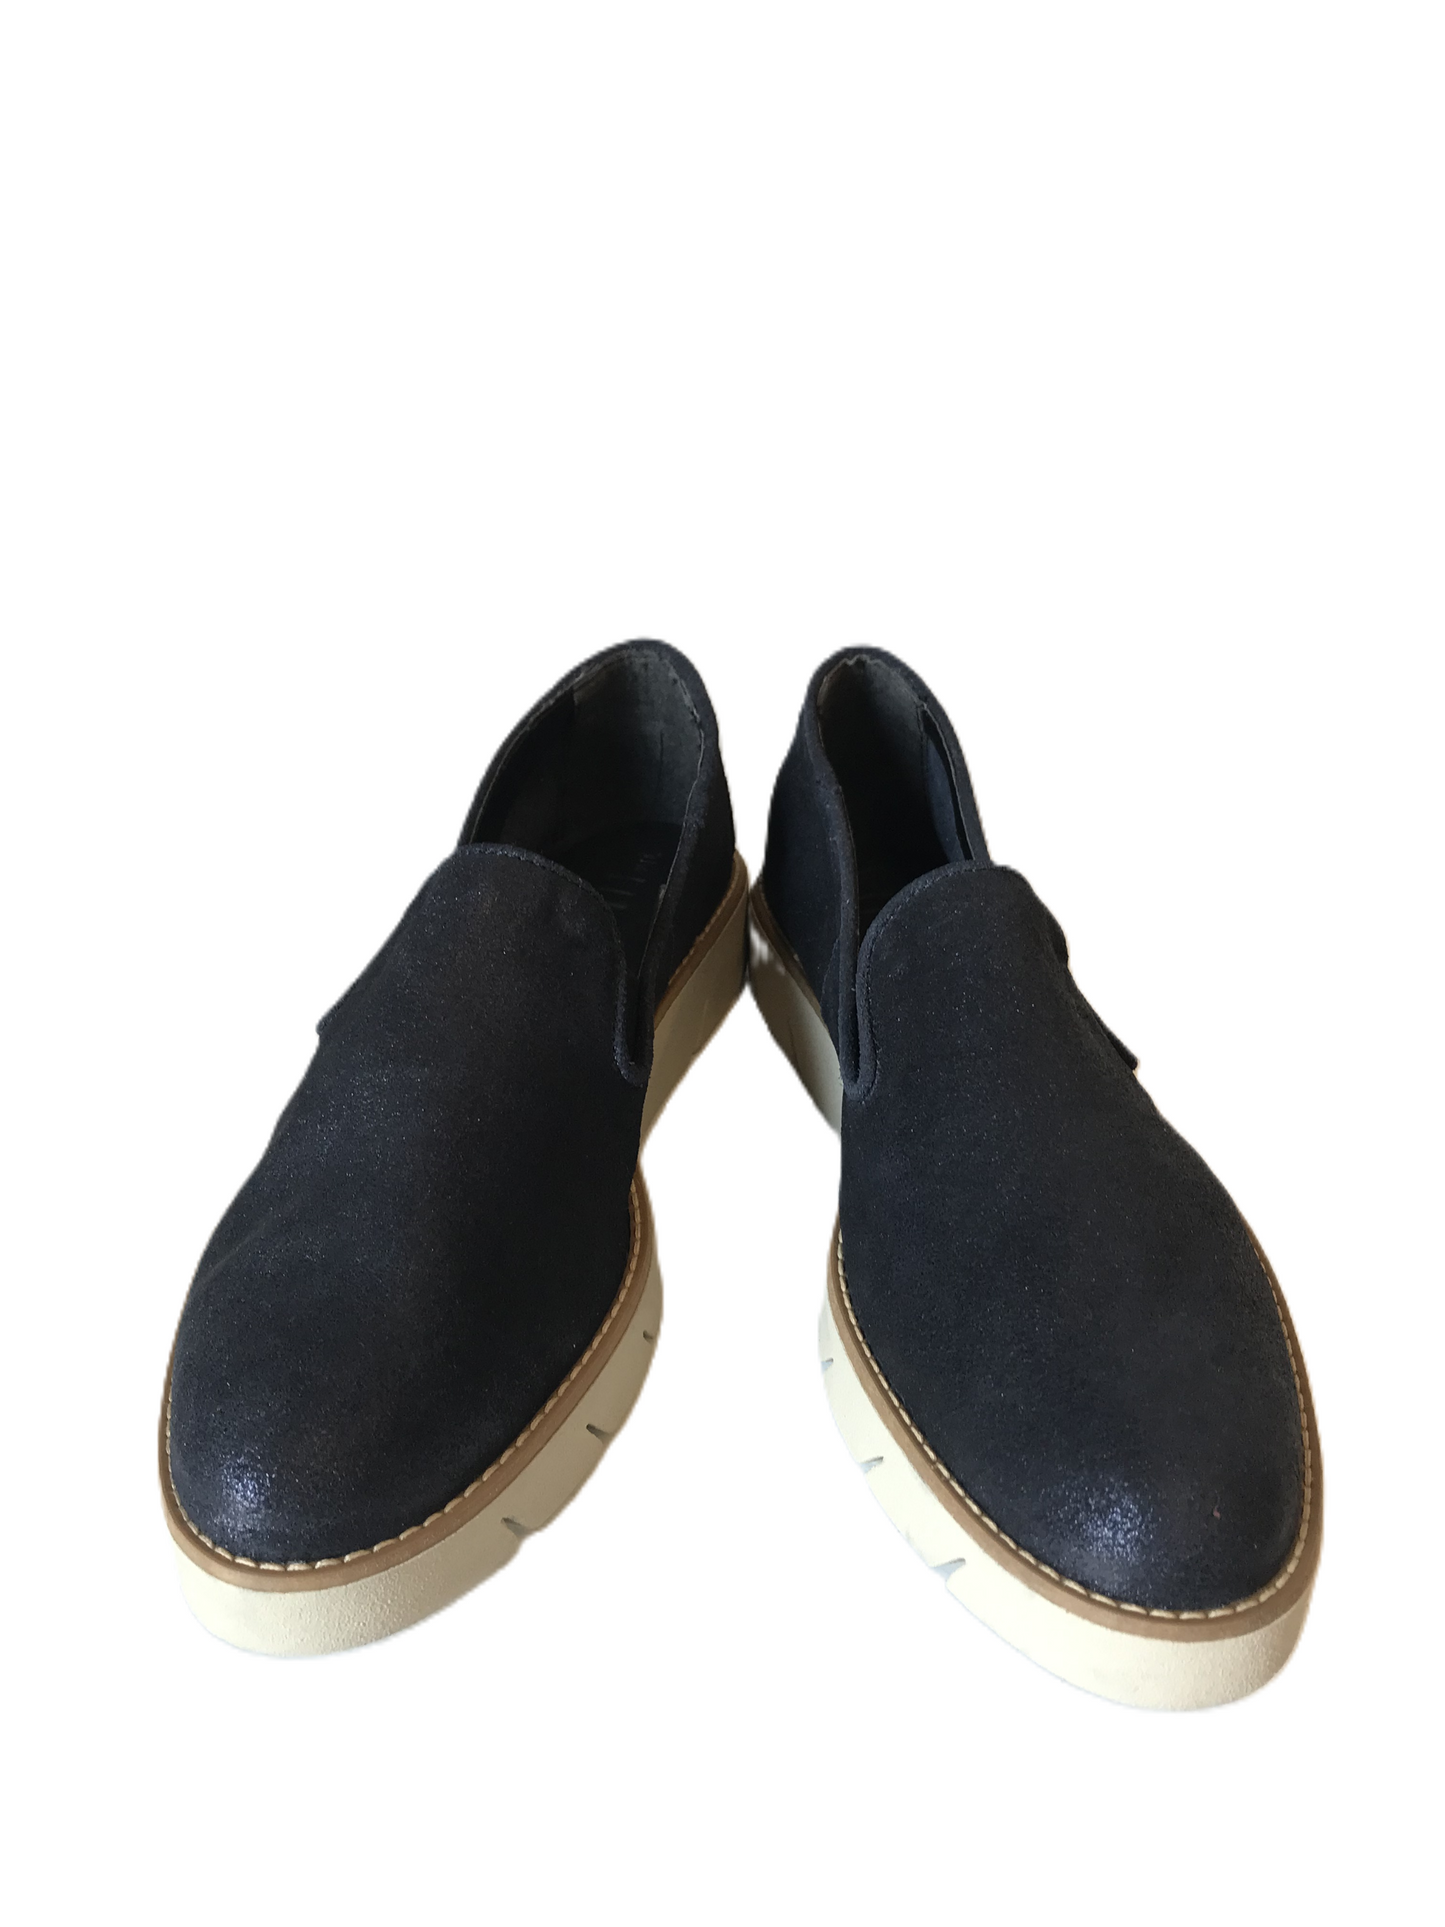 Navy Shoes Flats By The Flexx Size: 8.5